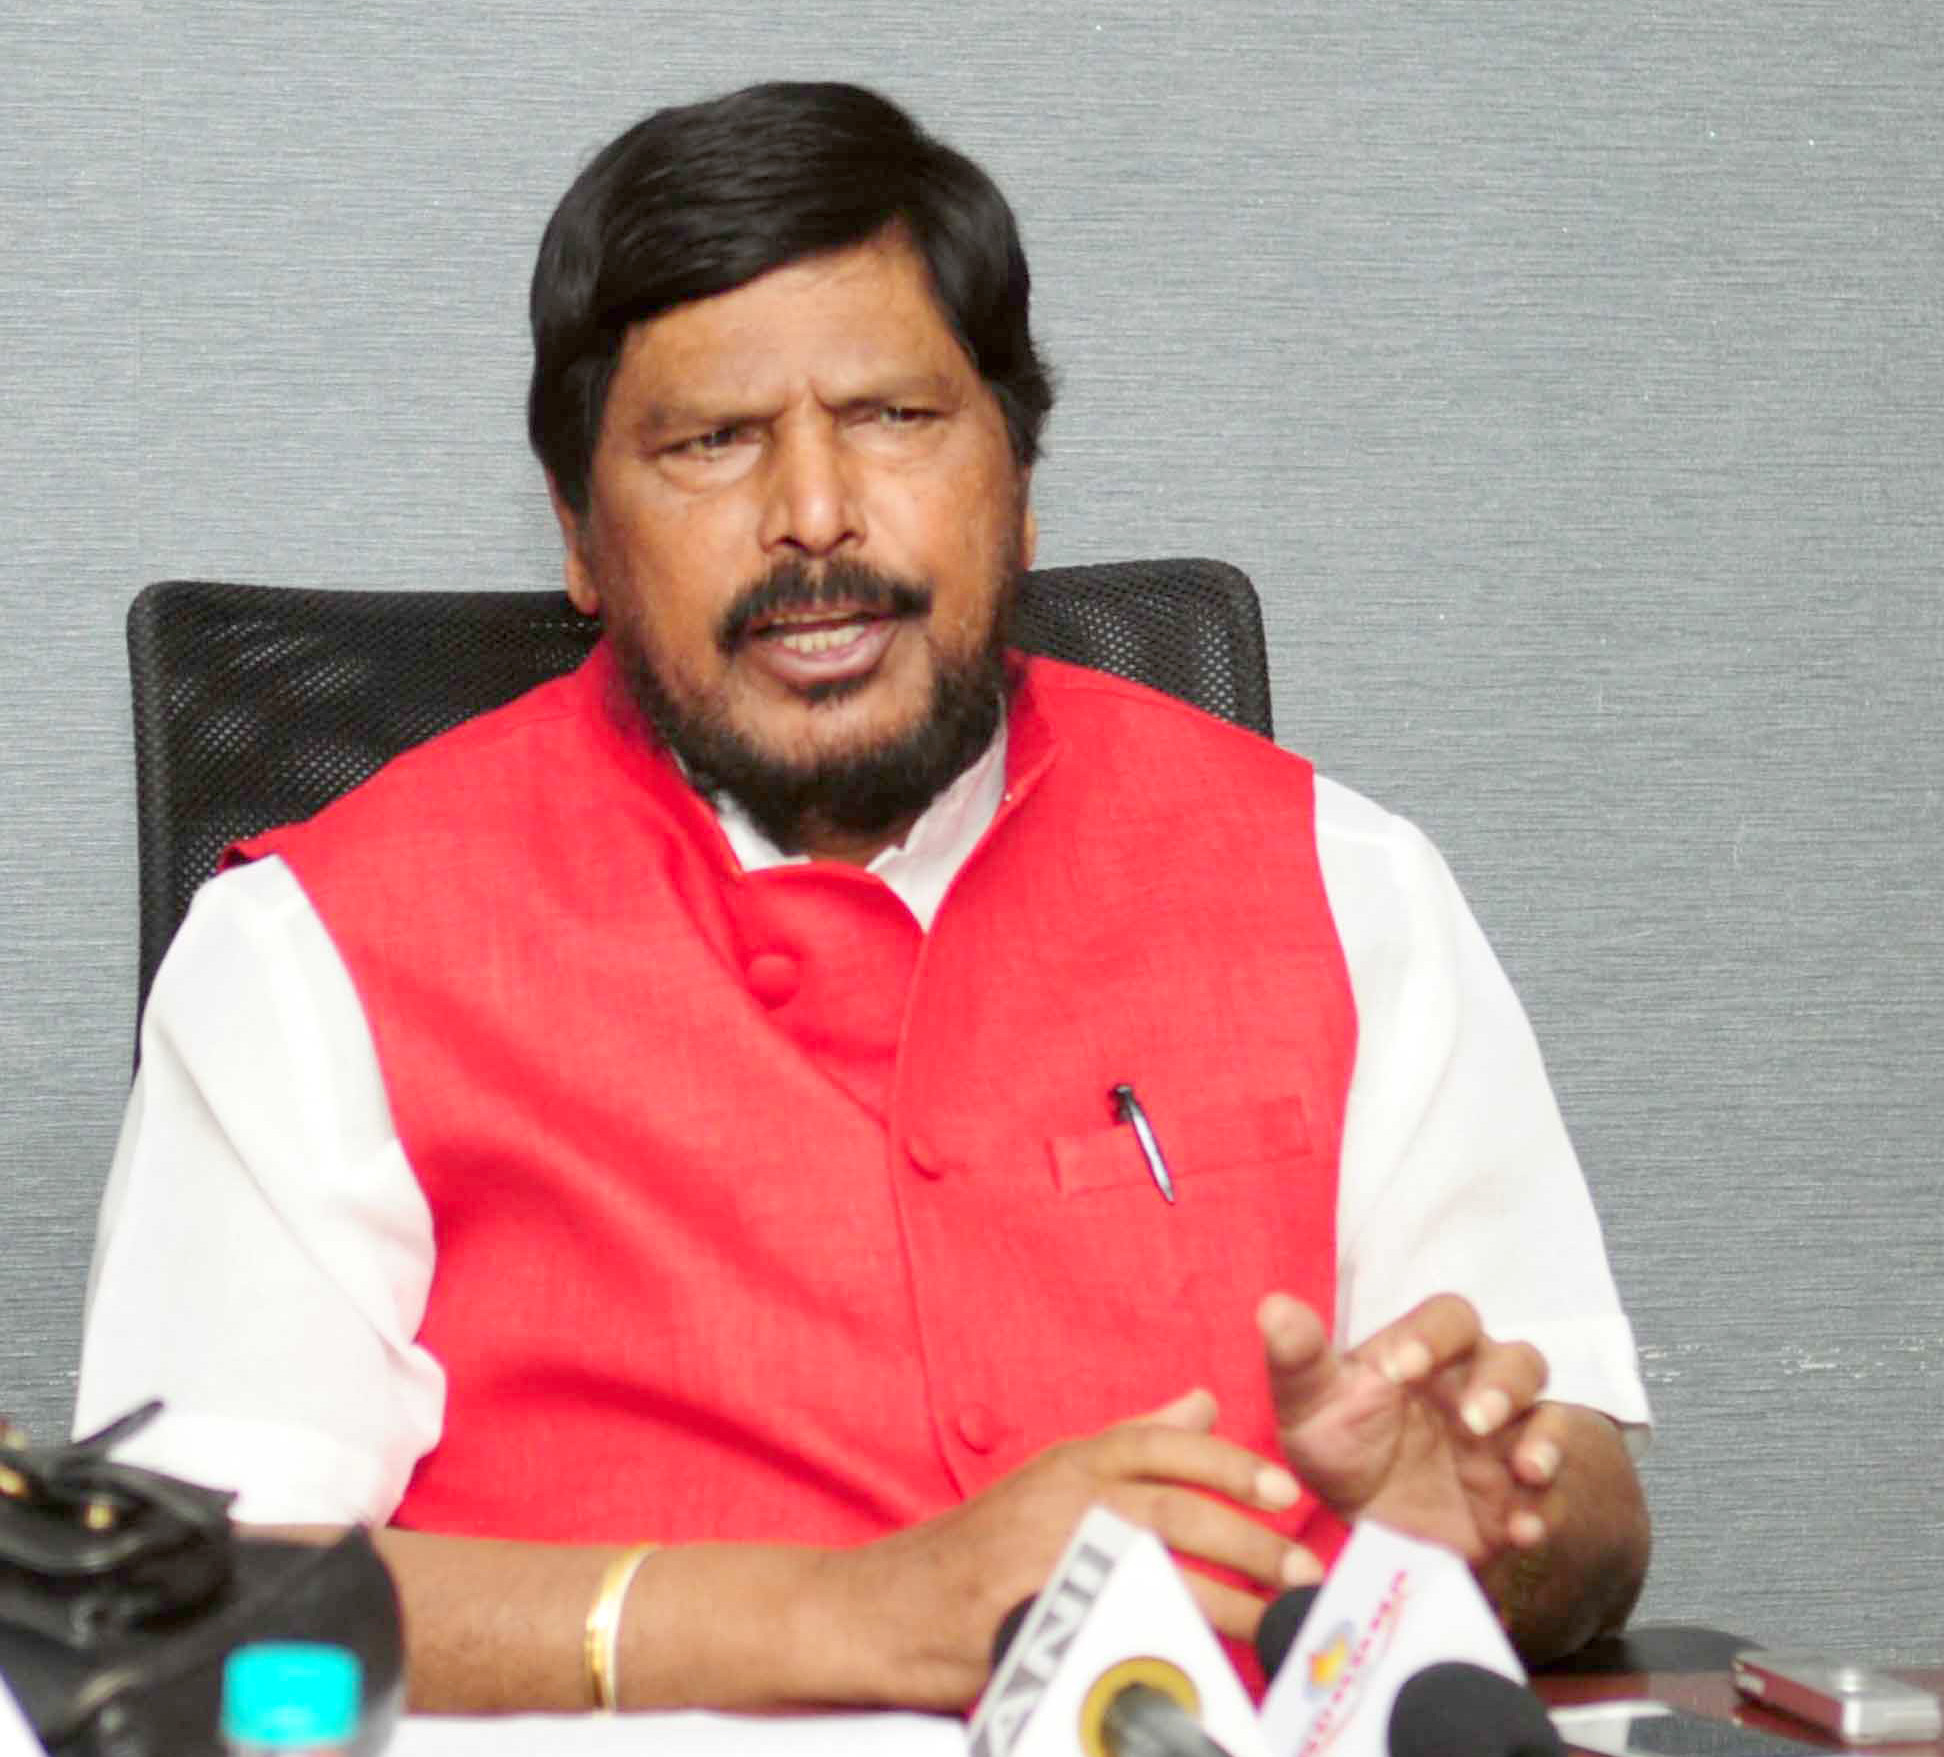 The_Minister_of_State_for_Social_Justice_&_Empowerment,_Shri_Ramdas_Athawale_addressing_a_press_conference,_in_New_Delhi_on_November_24,_2017